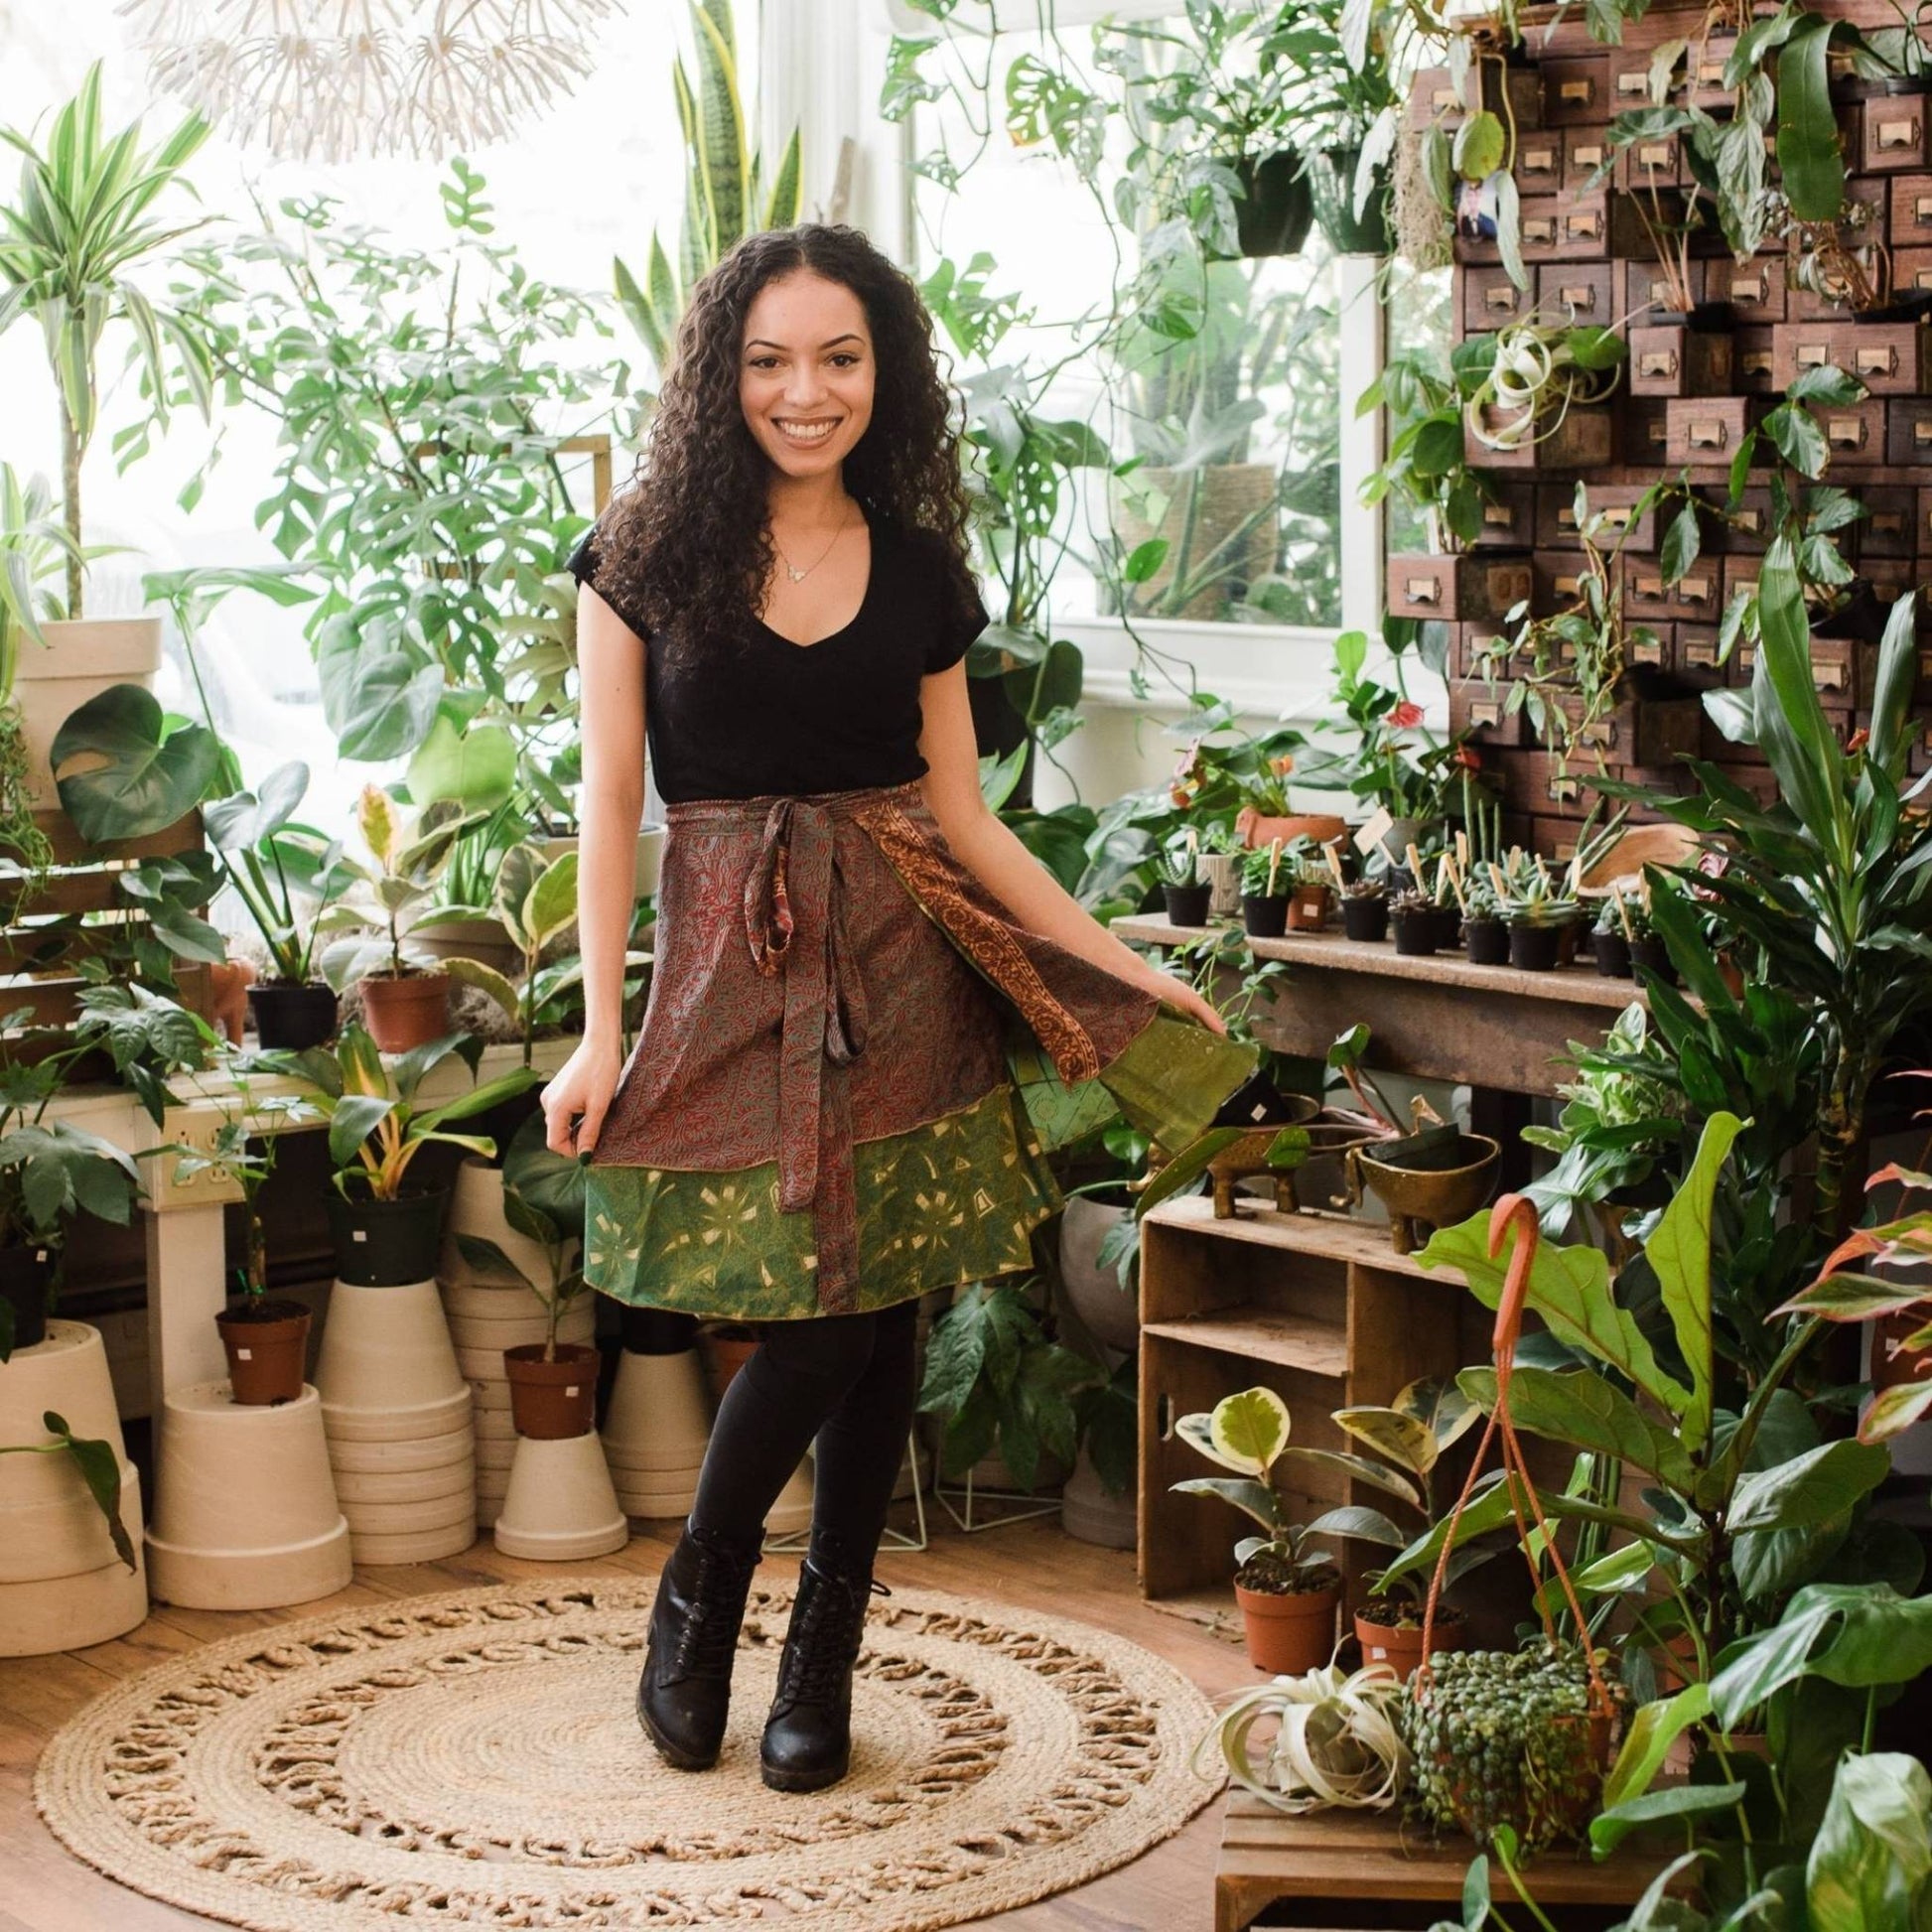 Petite model wearing a one of a kind mini sari wrap skirt in brown and green while standing in front of assorted potted plants.